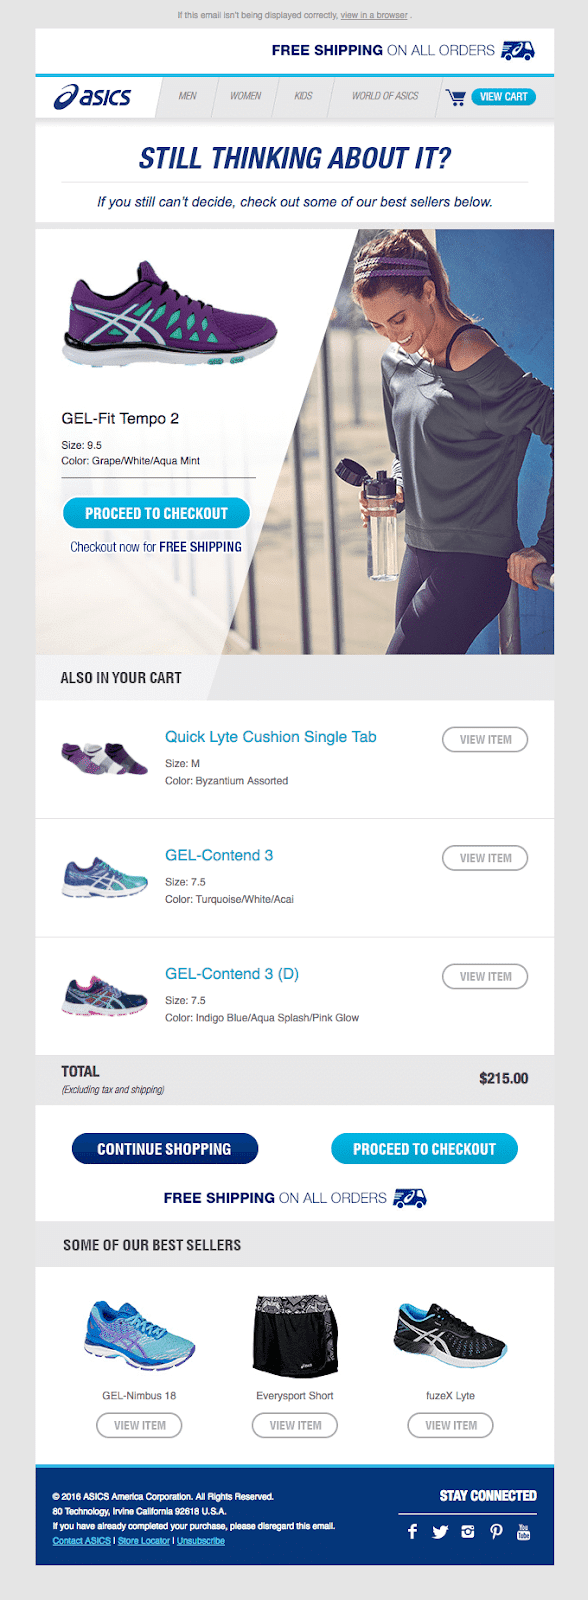 Another great way you can personalize your emails is by using your subscriber’s browsing data. Here’s a great example by Asics below: